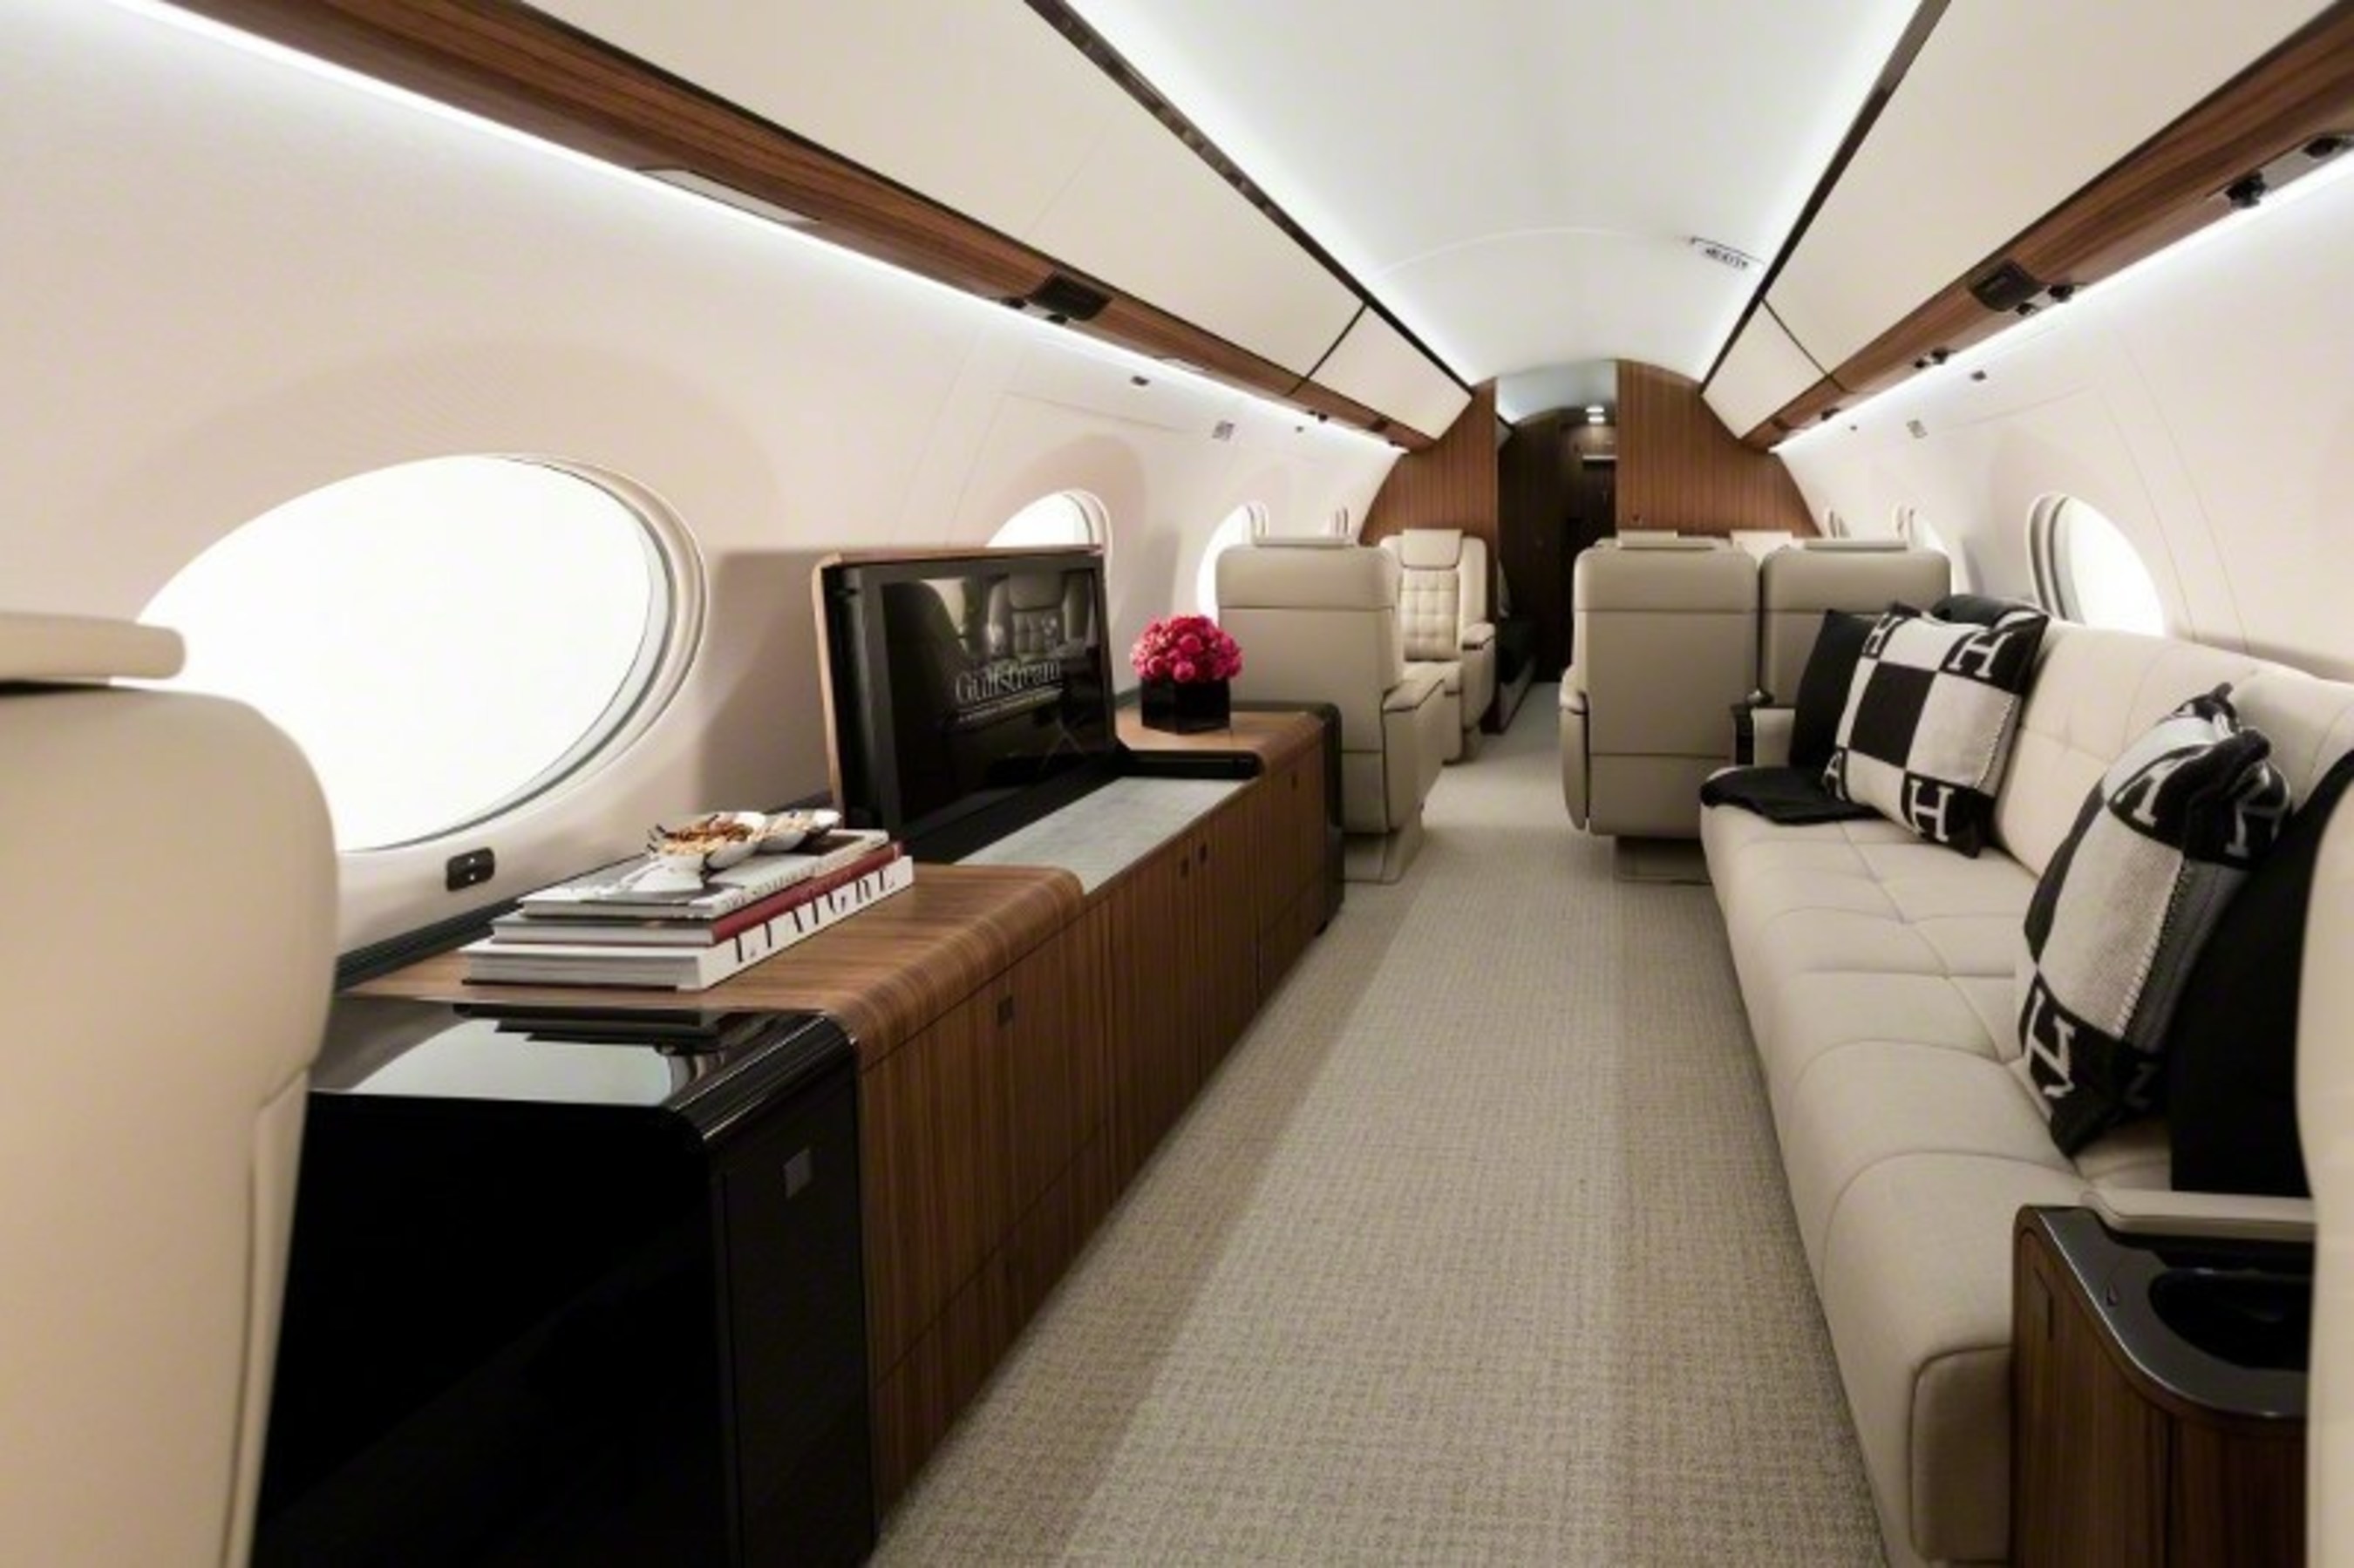 Gulfstream Aerospace Corp. is pleased to display three of its business jets at the Middle East and North Africa Business Aviation Association (MEBAA) Show Dec. 6-8 in Dubai. The static display will include the company flagship Gulfstream G650ER as well as the high-performing Gulfstream G550 and the class-leading Gulfstream G280. The four-living-area G650ER will headline Gulfstream's presence, showcasing the company's commitment to exceeding customers' expectations for customization, comfort and craftsmanship.